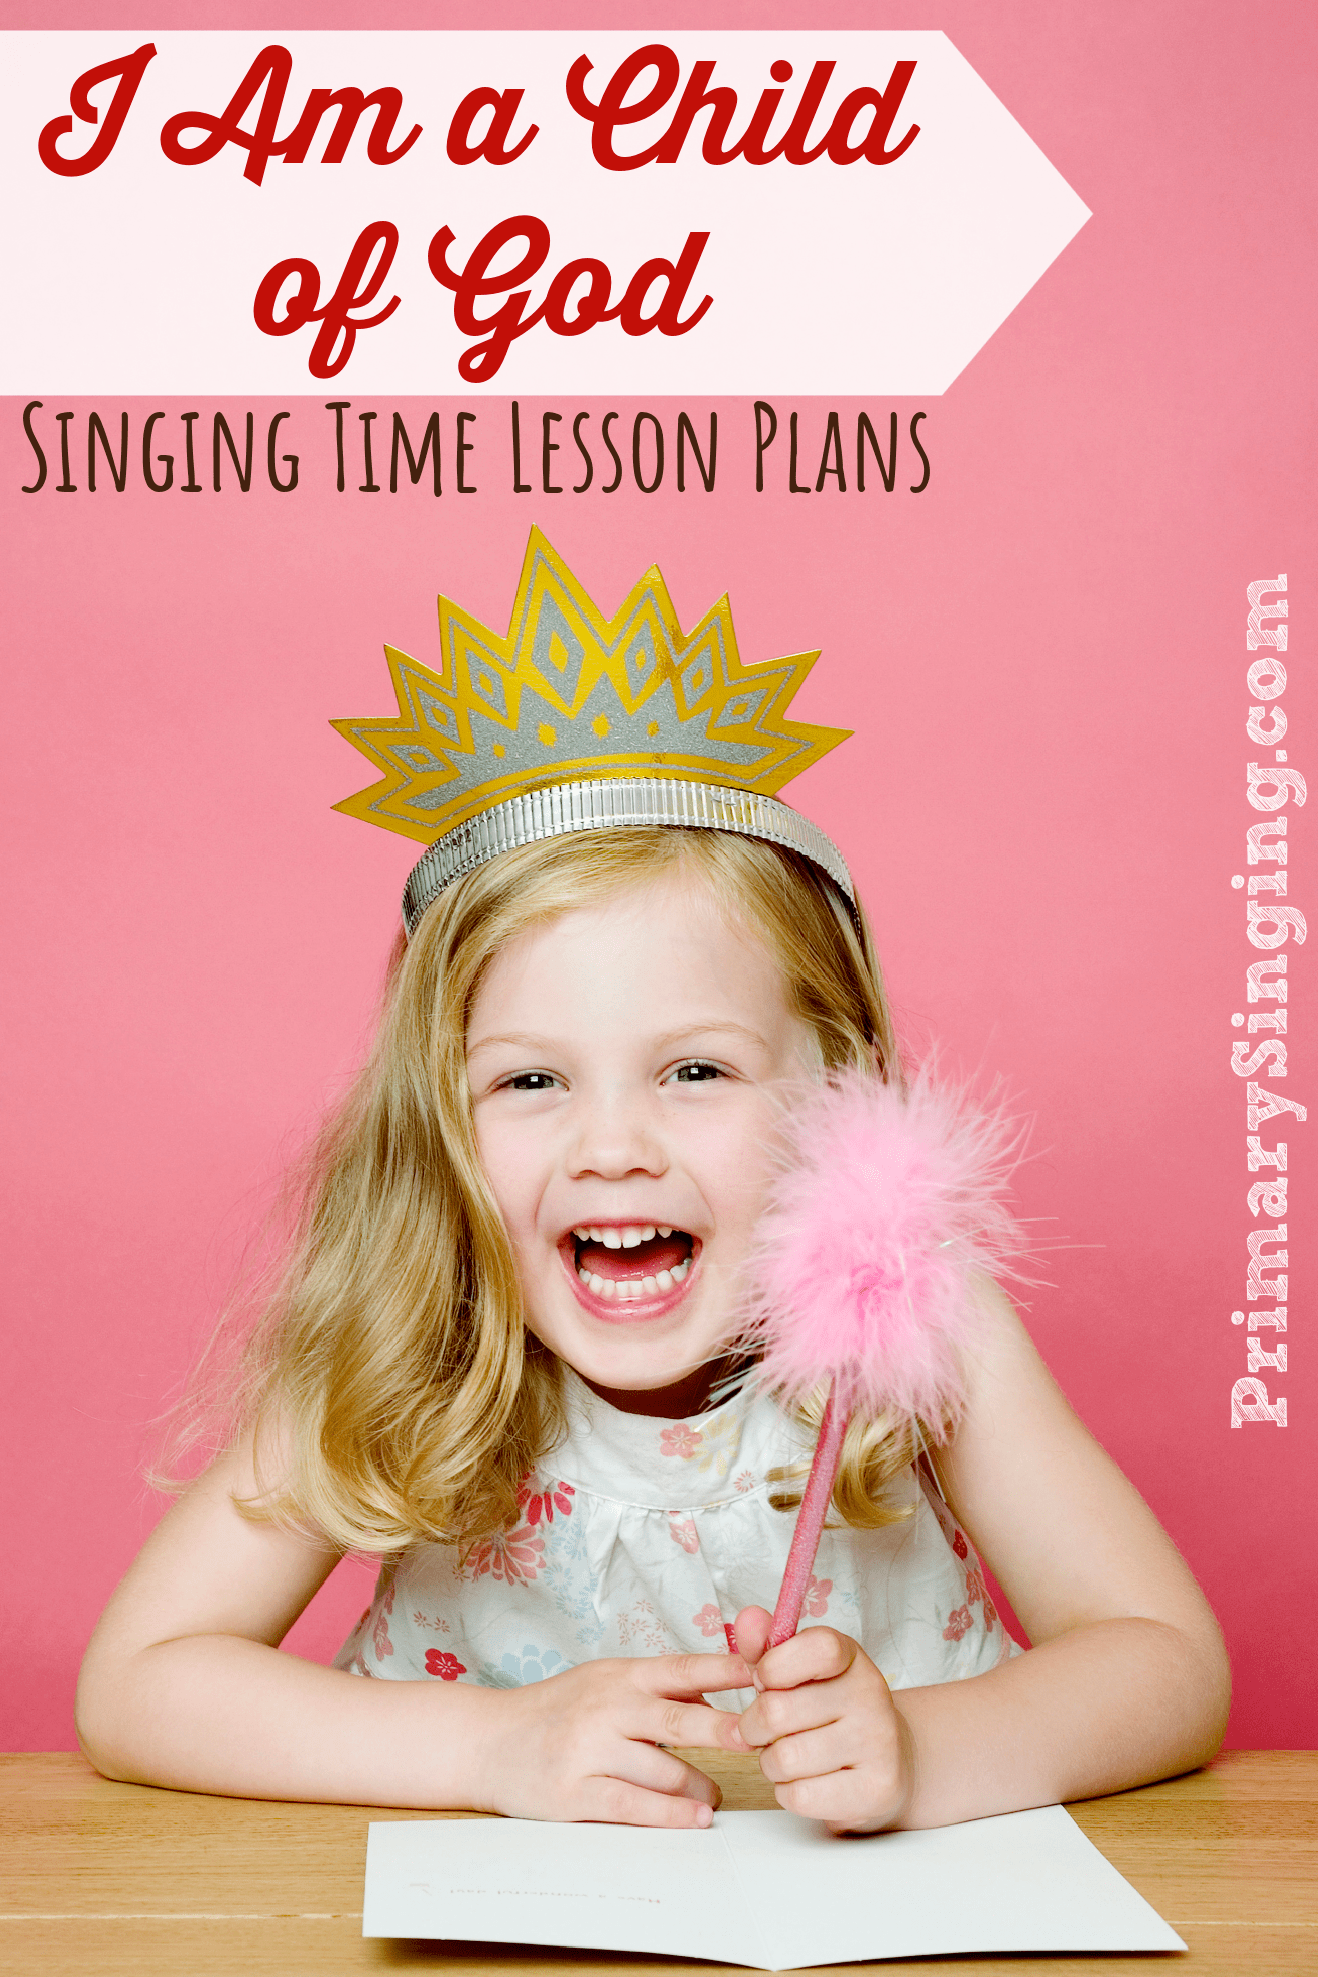 27 I Am a Child of God Singing Time Ideas lots of fun ways to teach I Am a Child of God lesson plans for LDS Primary Music Leaders / Choristers - Teaching activities include finger lights, color code, finger actions, concentration match game, mirror image, and many more!